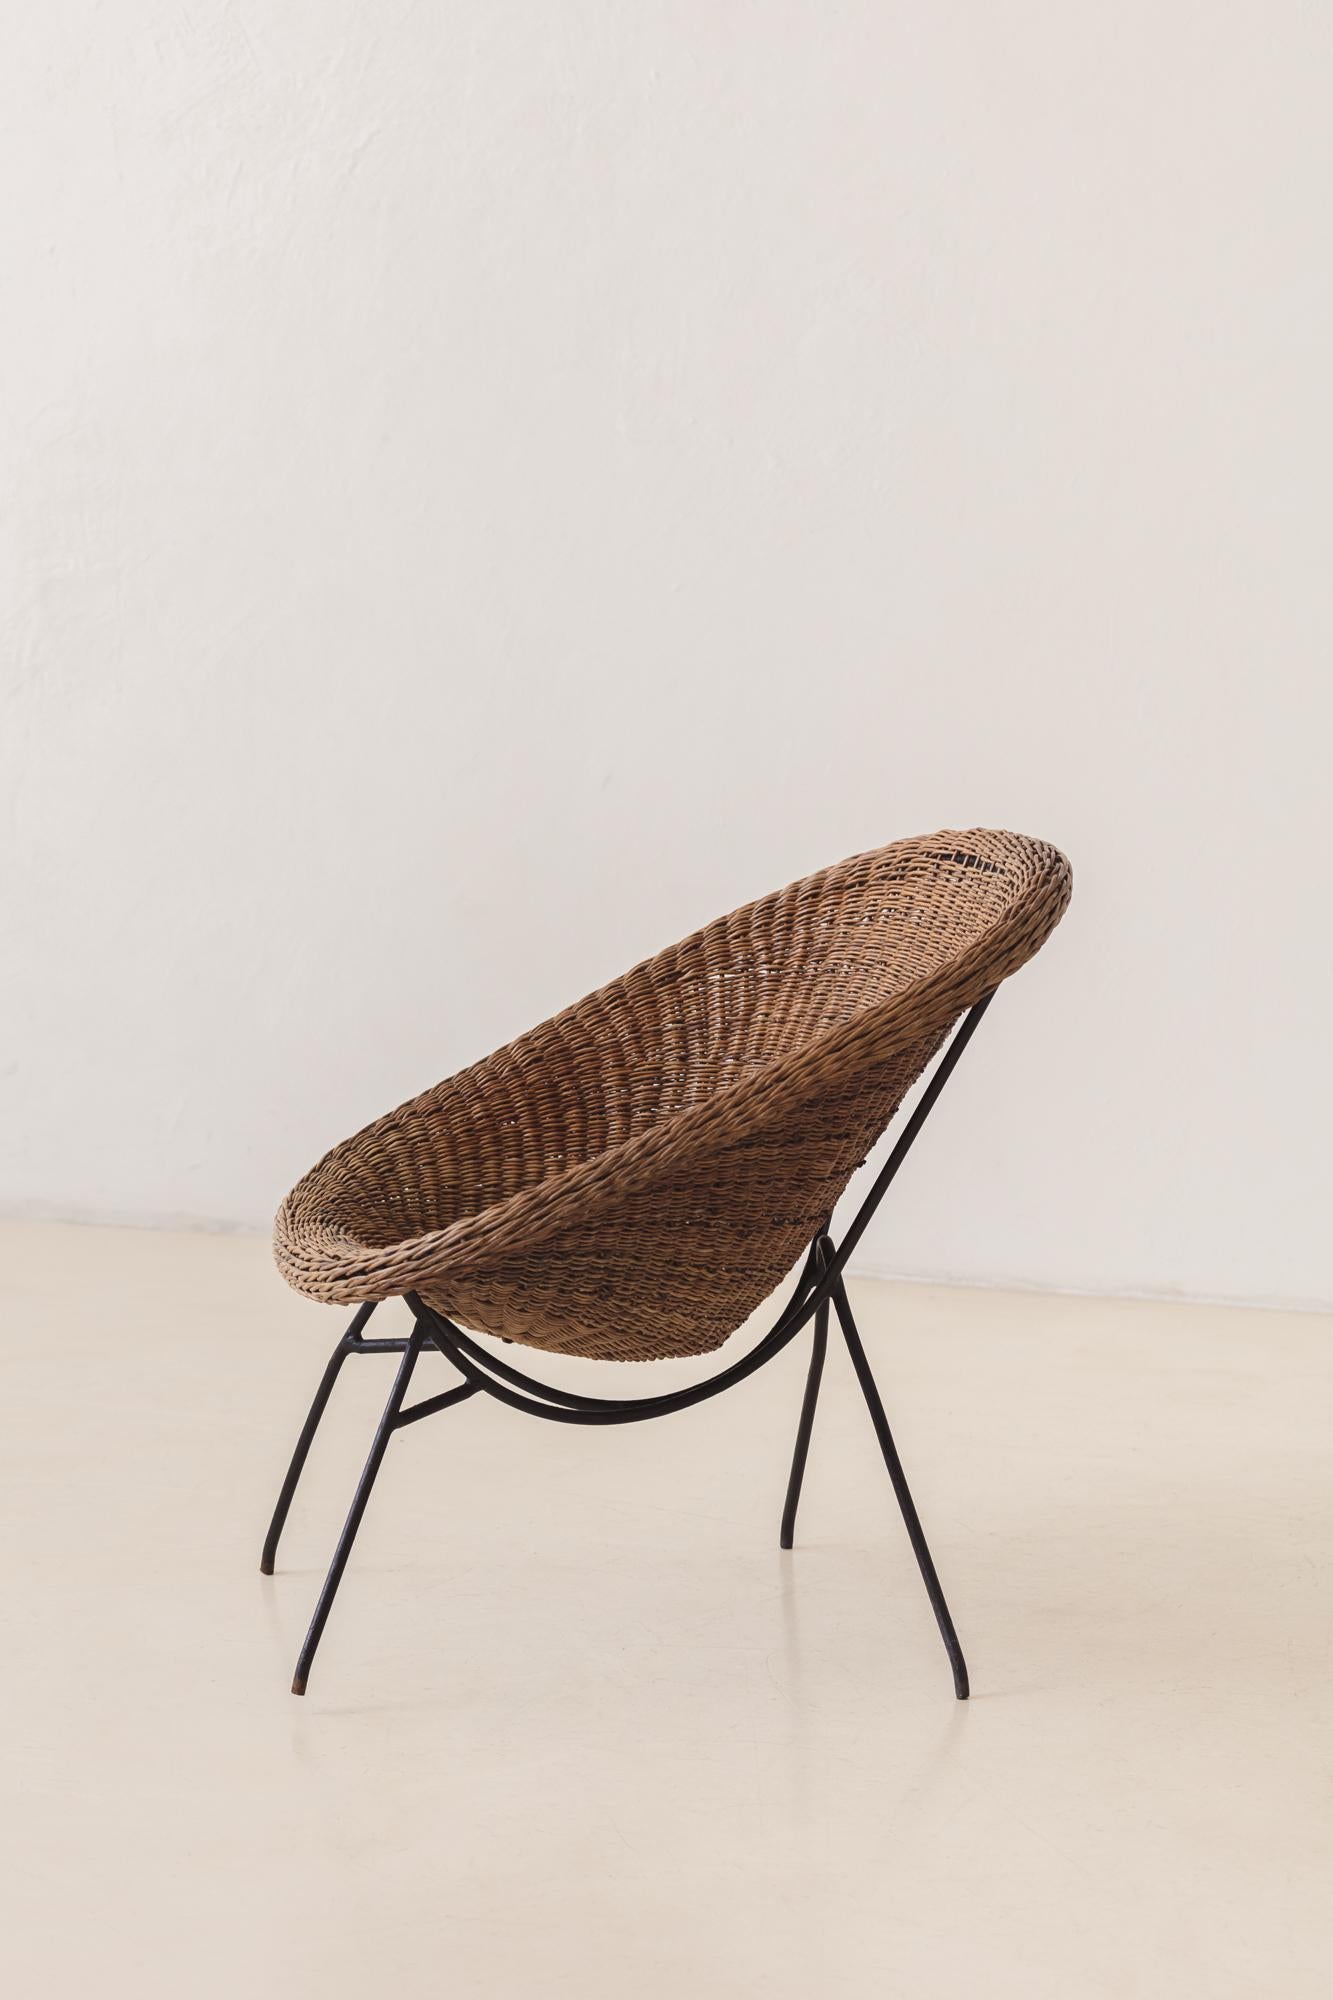 Wicker and Iron Armchair, Unknown Designer, Brazilian Midcentury Modern, c. 1955 In Good Condition For Sale In New York, NY